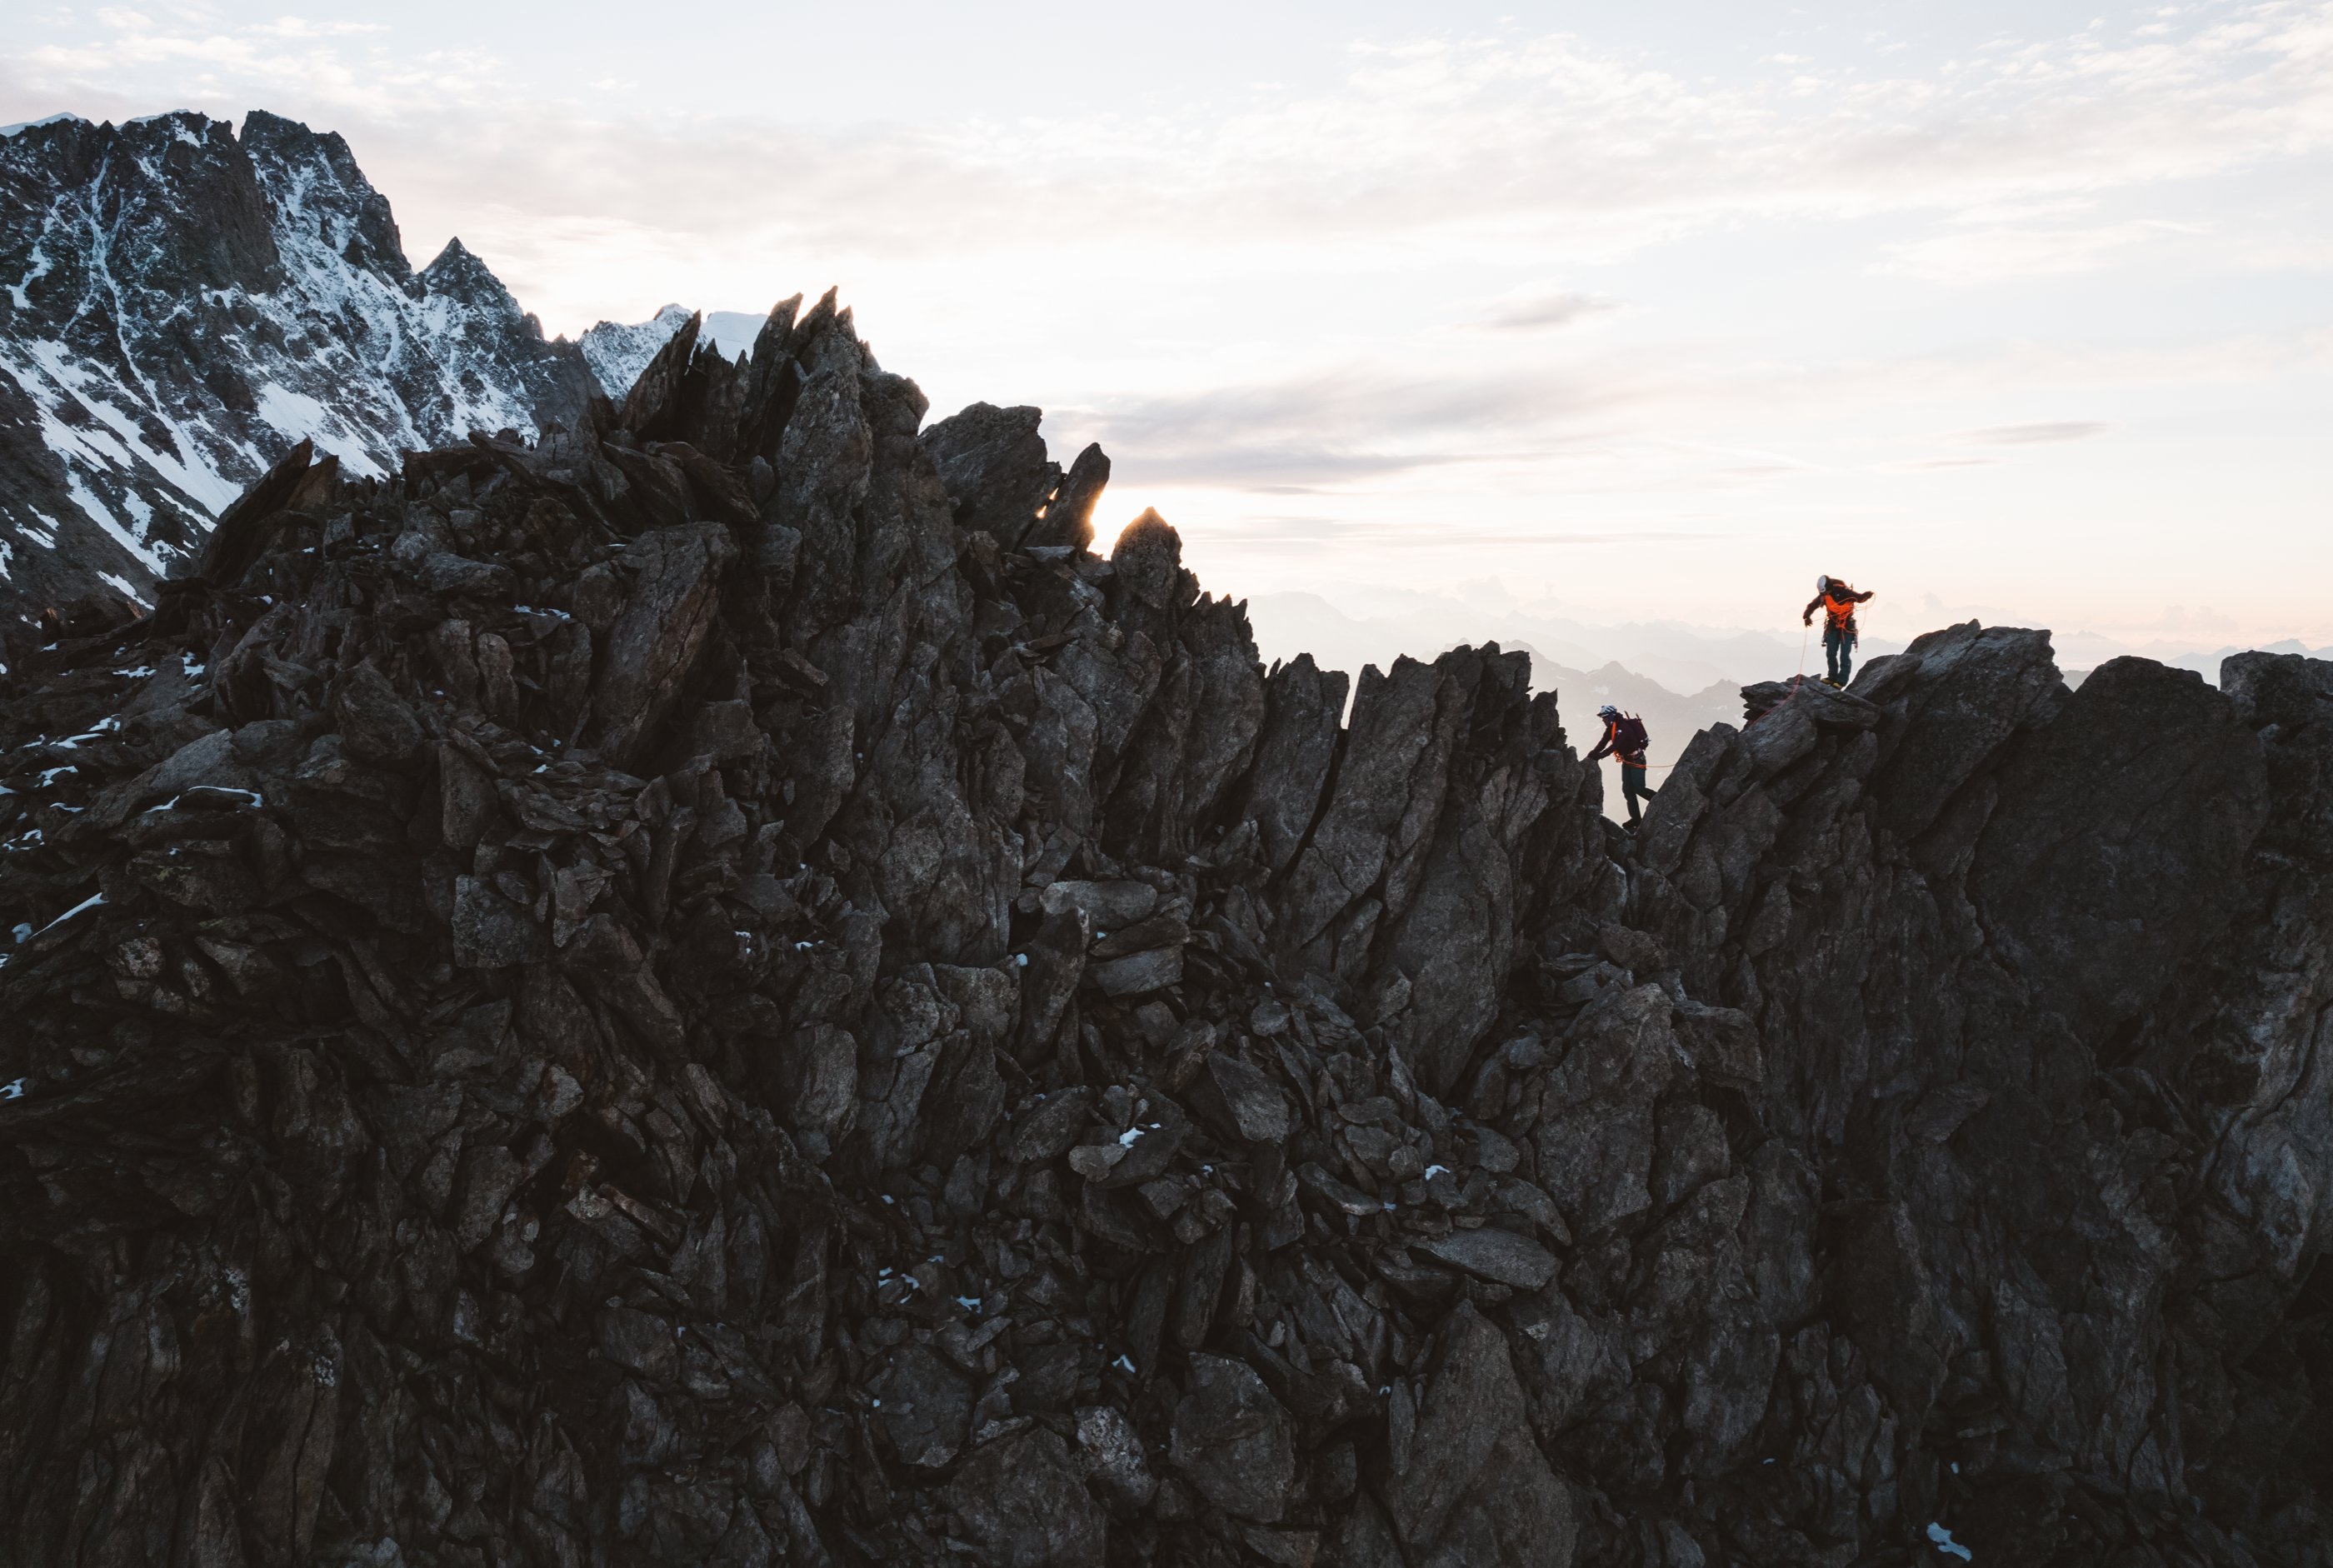 Two intrepid mountaineers are silhouetted against the cold, gray sky as they scramble across a jagged alpine ridge.